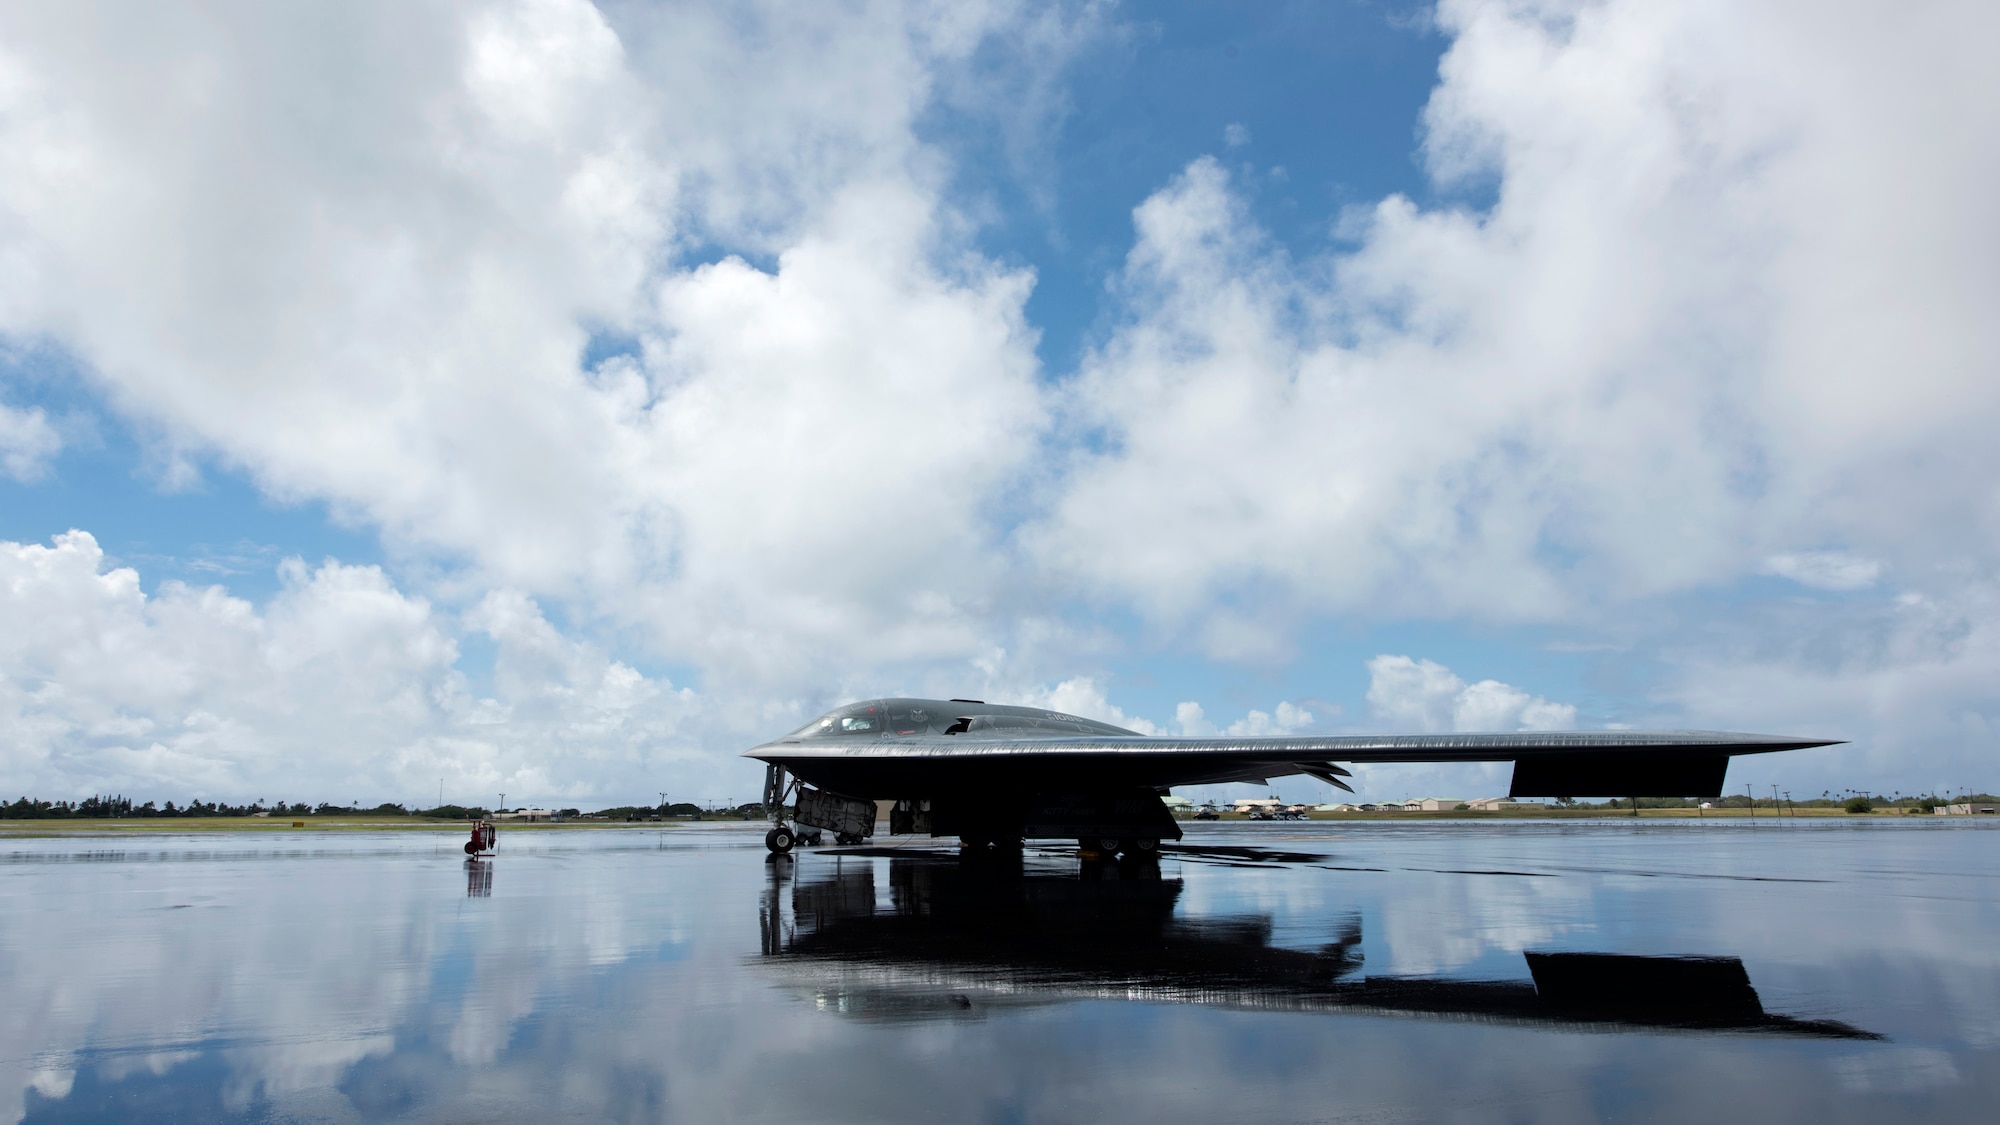 A U.S. Air Force B-2 Spirit deployed from Whiteman Air Force Base, Missouri, to Joint Base Pearl Harbor-Hickam, Hawaii, in support of the U.S. Strategic Command’s Bomber Task Force deployment is parked on the flightline Sept. 26, 2018. The B-2 is a multi-role bomber with a wingspan of 172 feet capable of delivering both conventional and nuclear munitions. (U.S. Air Force photo by Staff Sgt. Danielle Quilla)